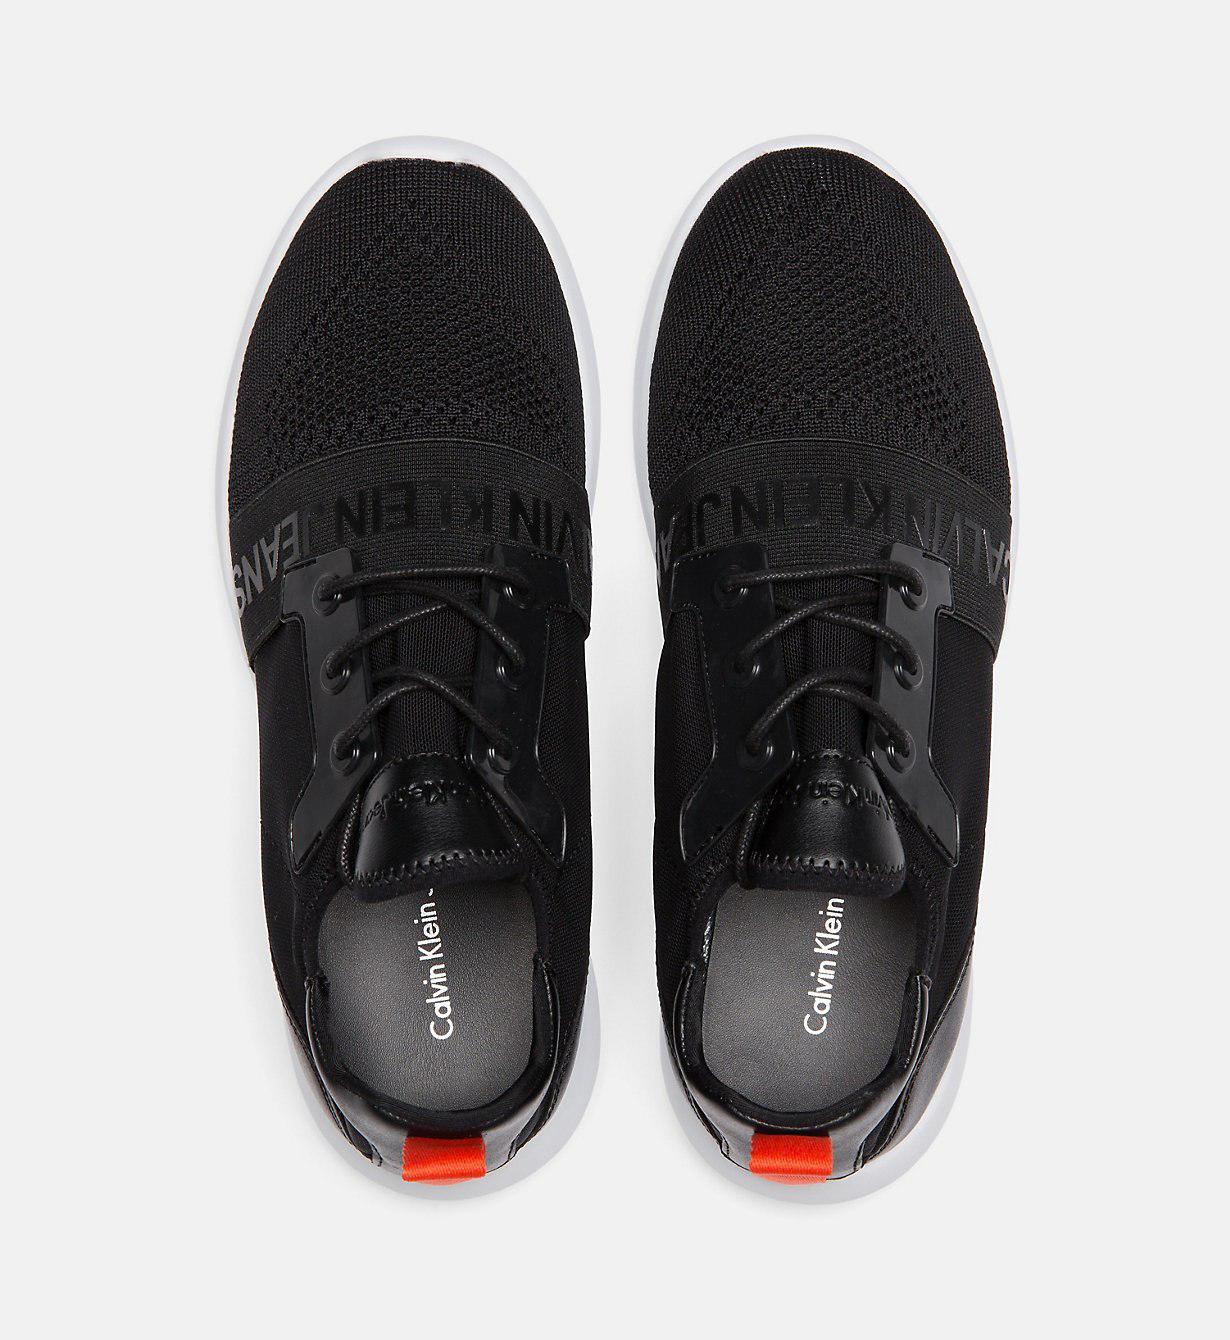 Calvin Klein Synthetic Knit Trainers in Black for Men - Lyst